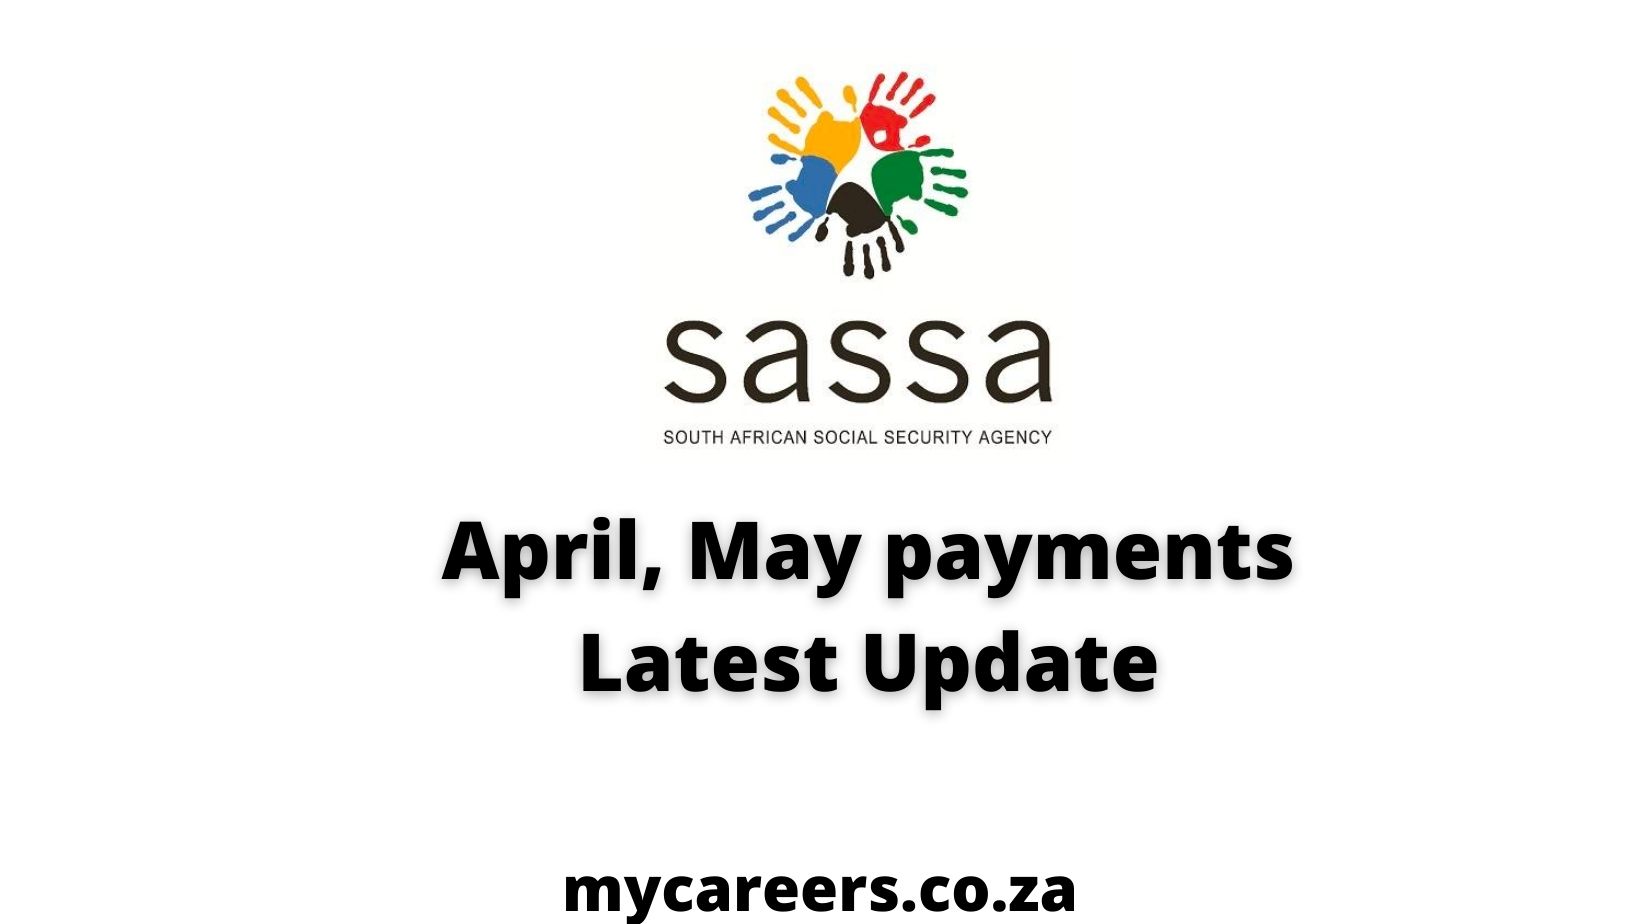 Applied for the R350 grant? Sassa wants you to update your info by end of the week for April, May payments